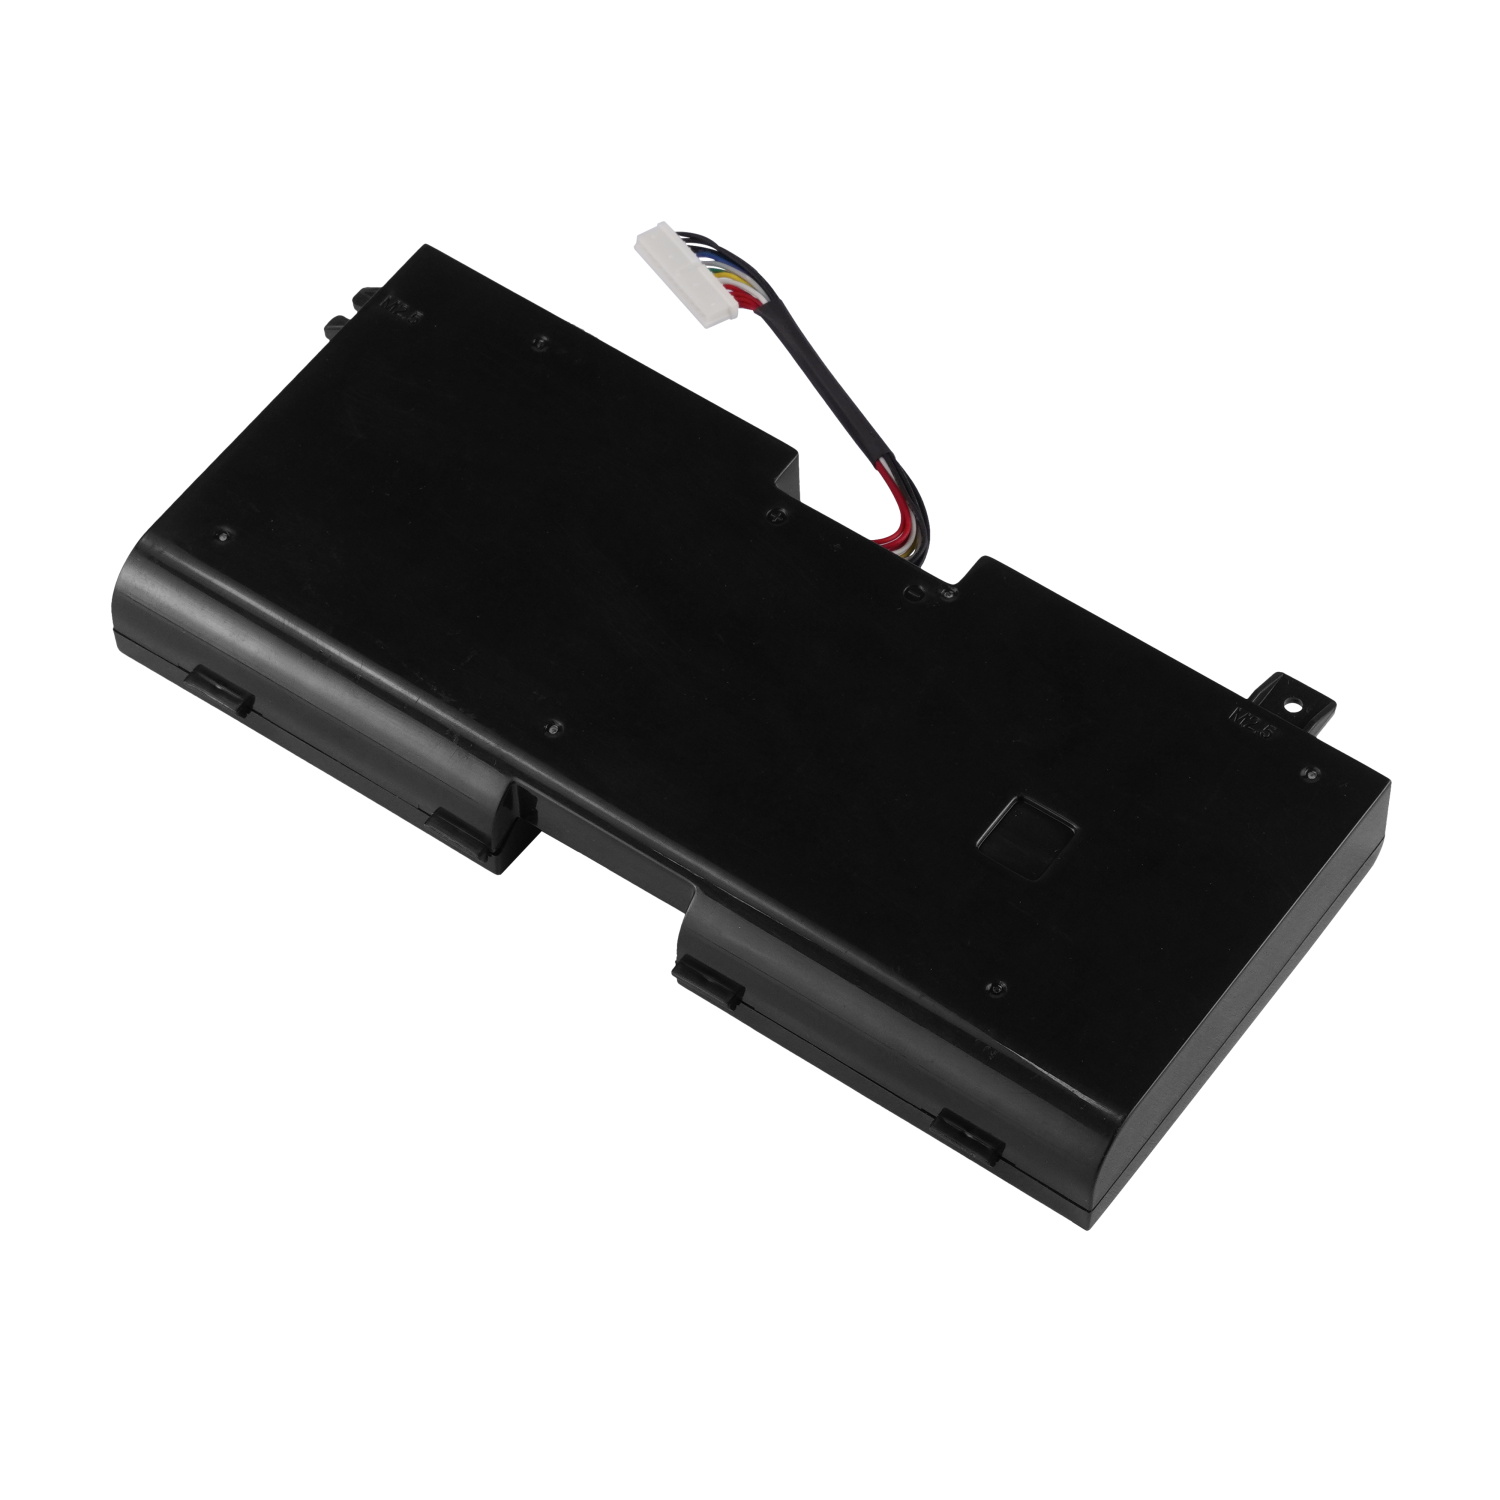 2F8K3 Notebook Battery Replacement Laptop Battery for Dell Alienware 17 R1 17X M17X-R5 Alienware 18 R1 18X M18X-R3 Series